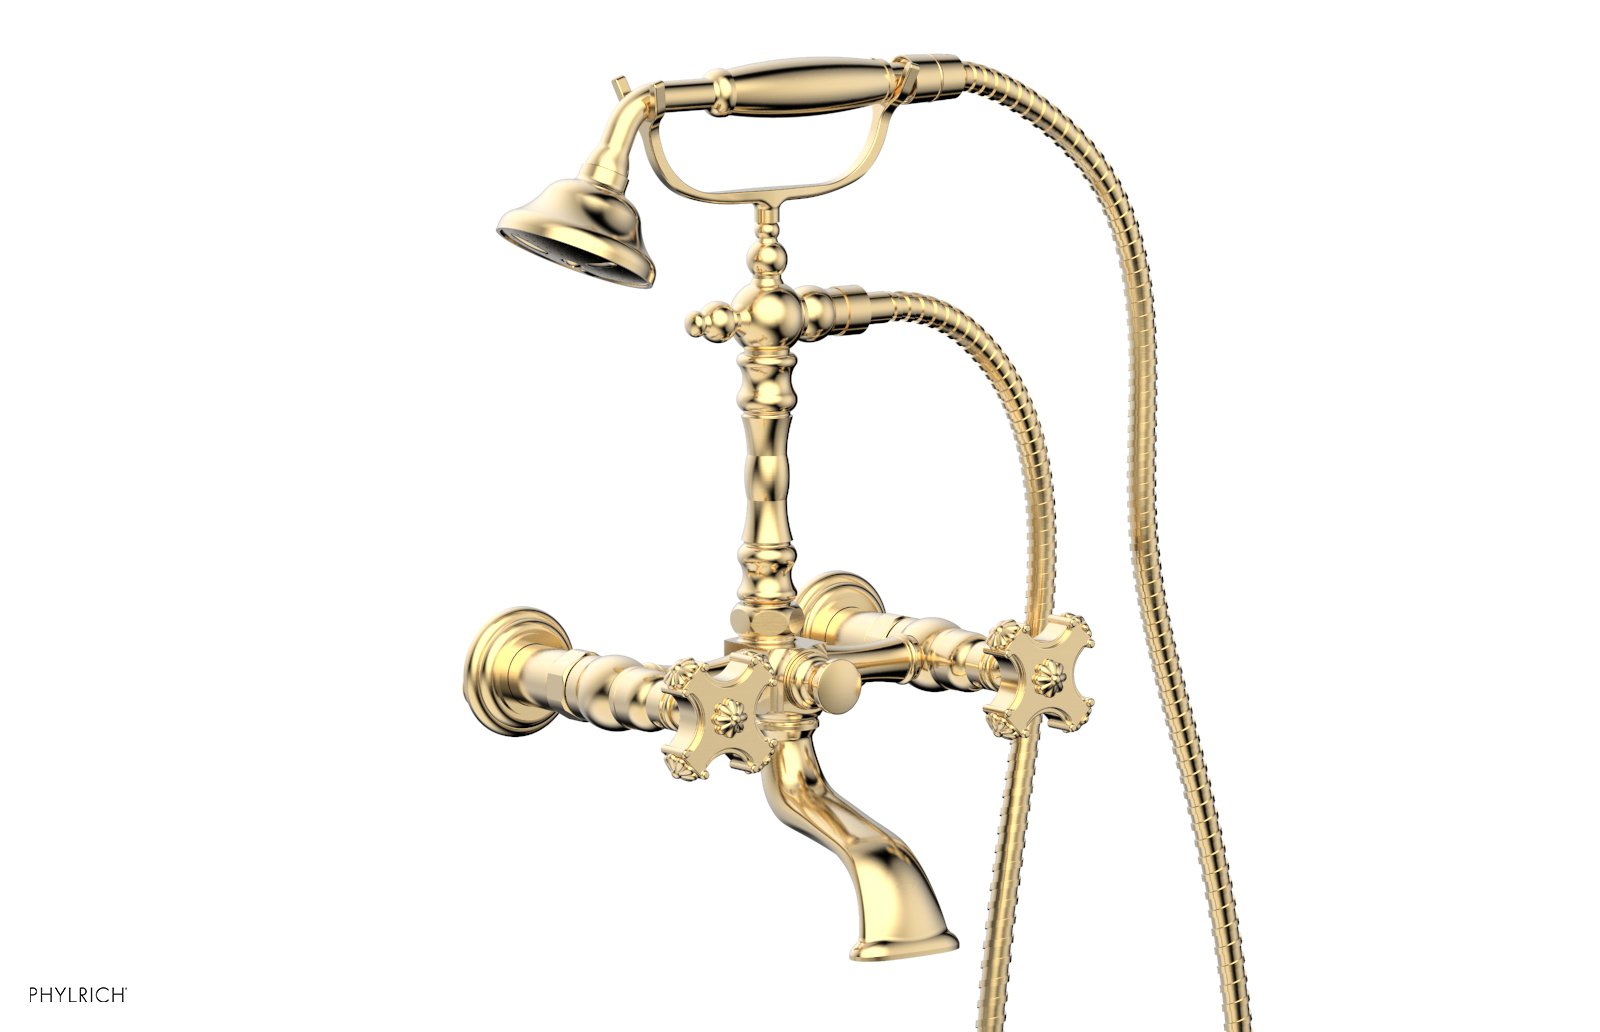 Phylrich MARVELLE Exposed Tub & Hand Shower - Cross Handle